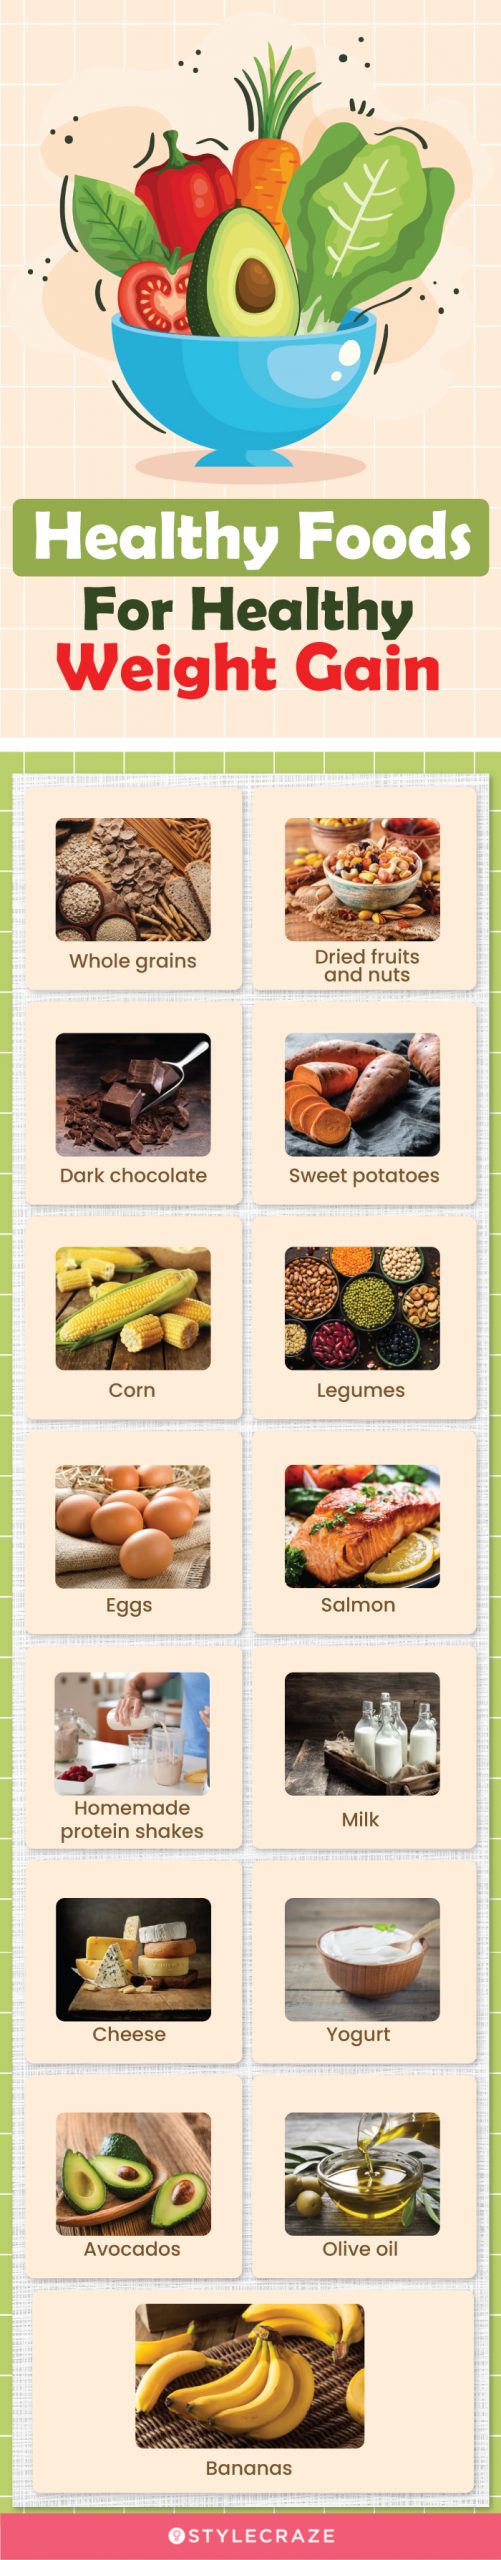 healthy foods for healthy weight gain (infographic)